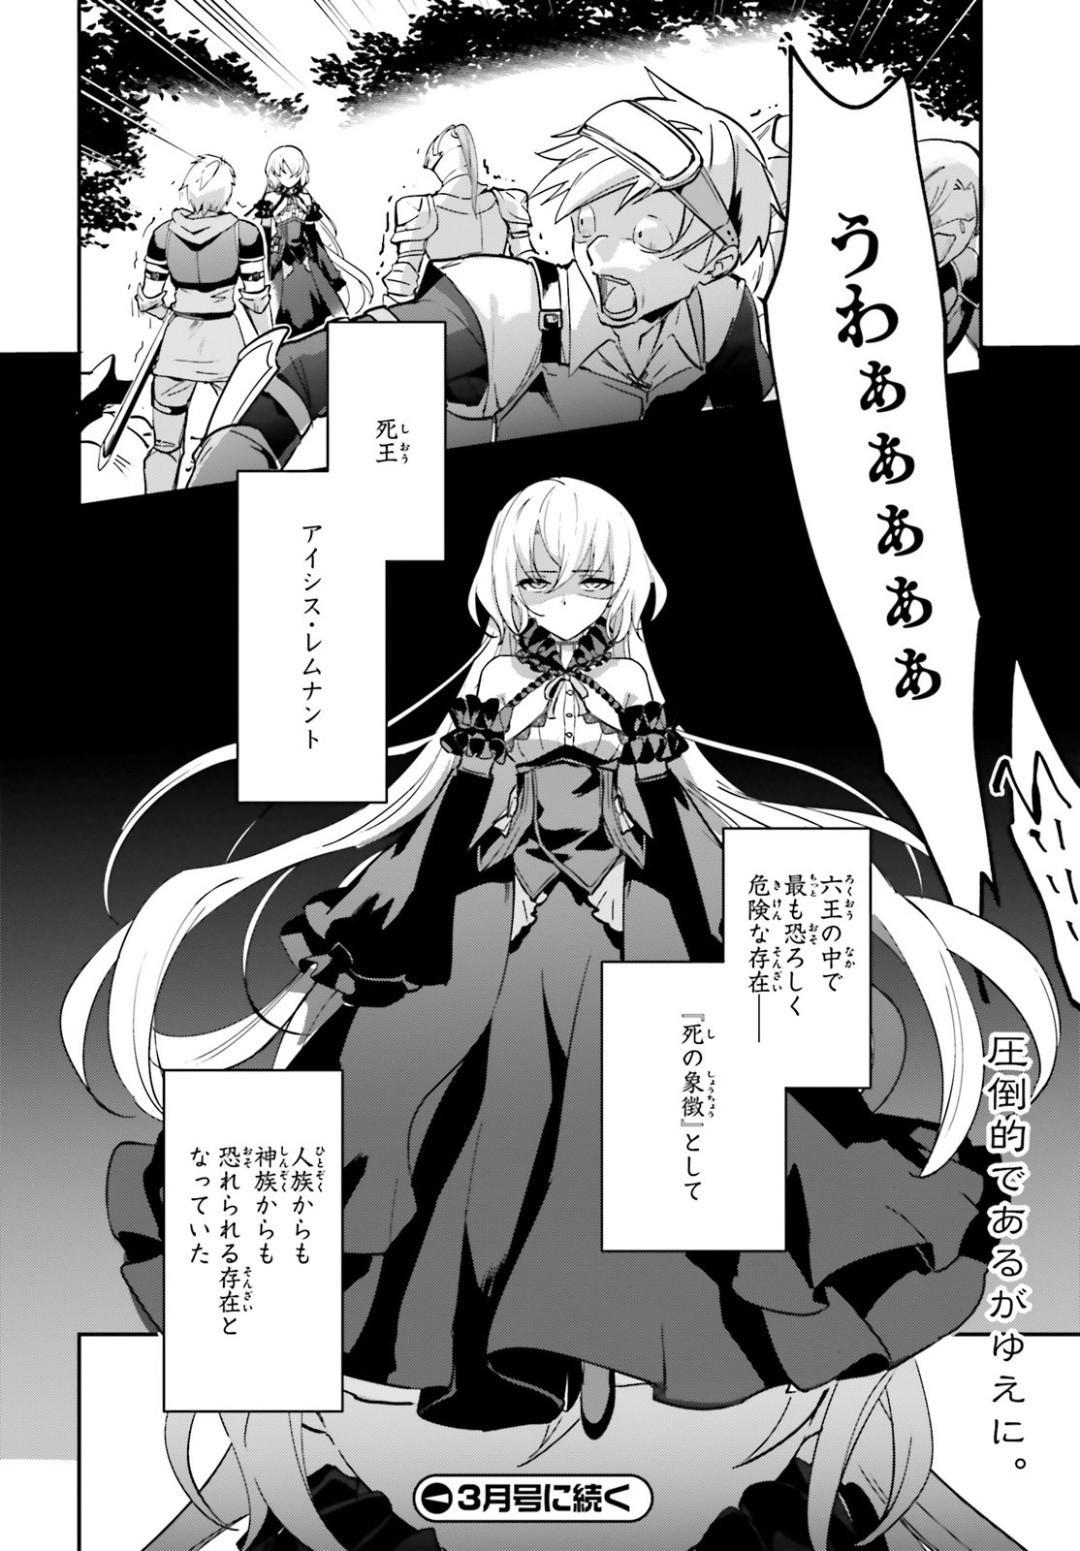 Fate-Apocrypha - Chapter 38 - Page 1